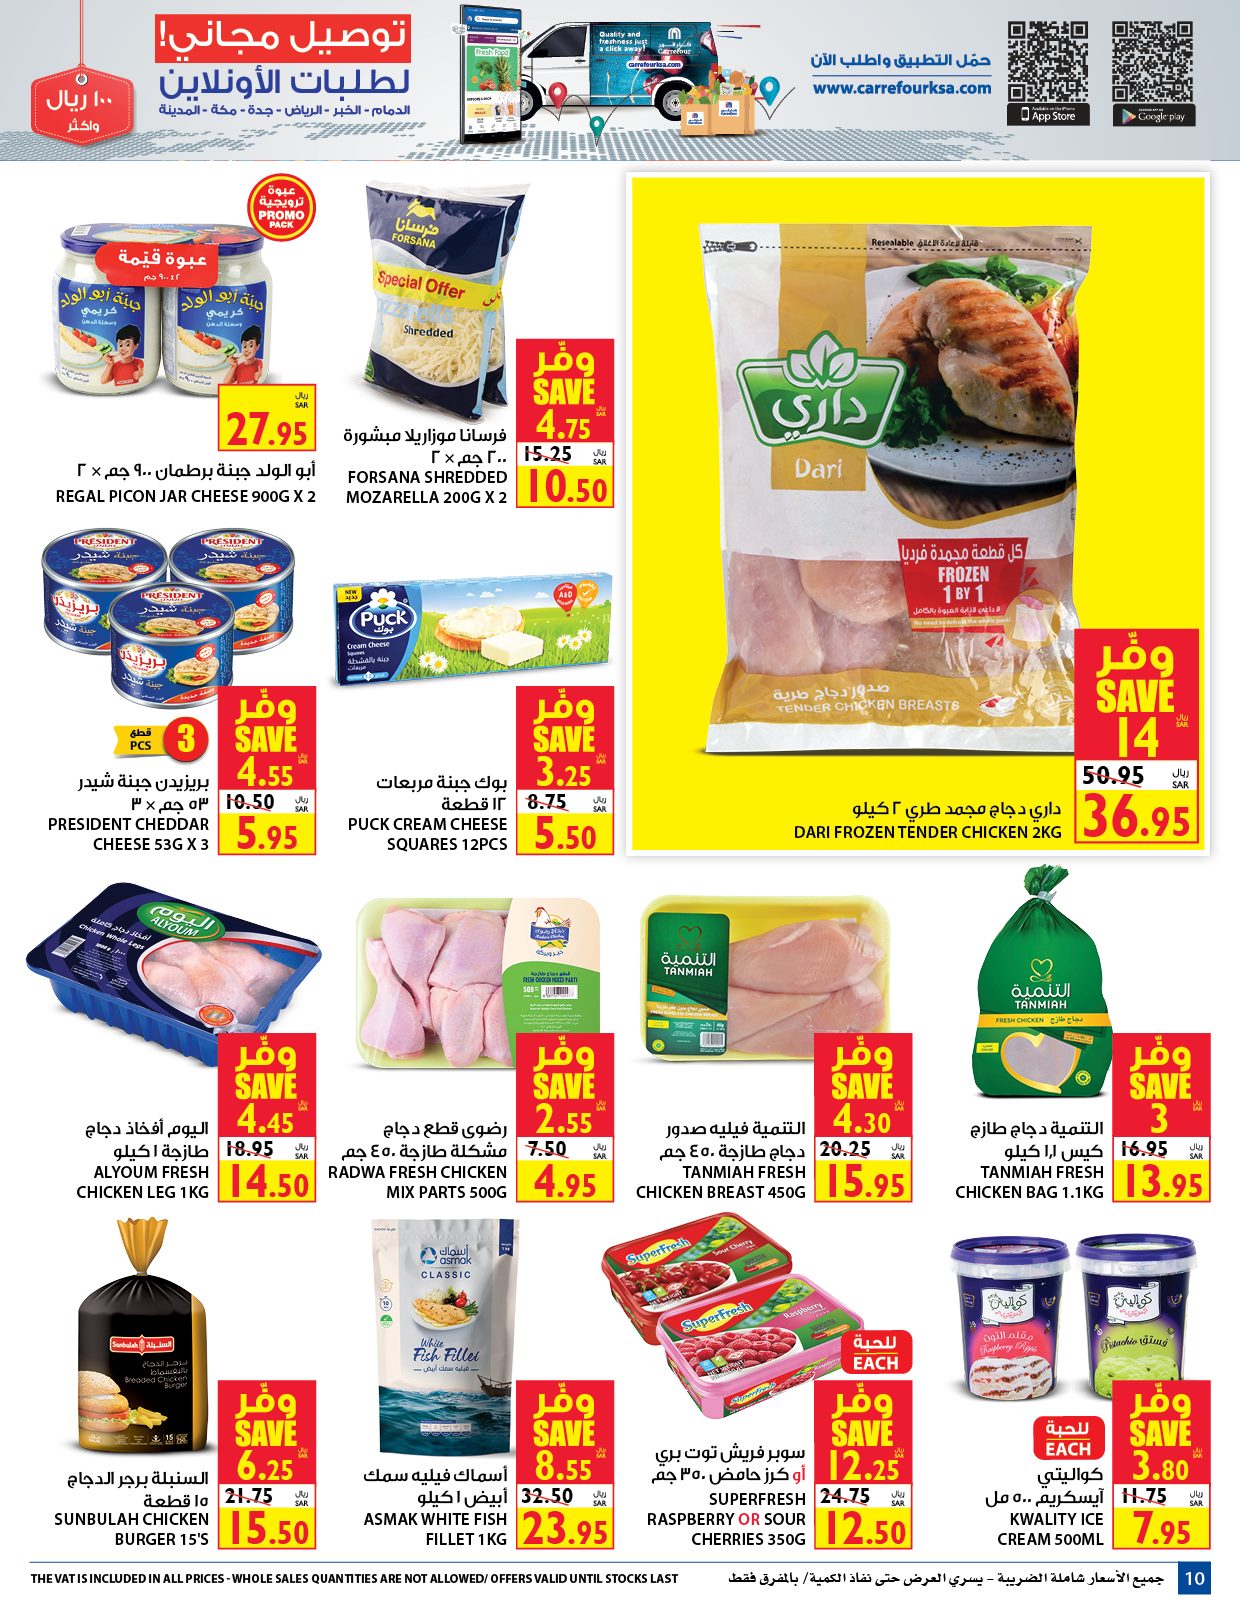 Carrefour Festival Offers from 12/8 till 25/8 | Carrefour KSA 11